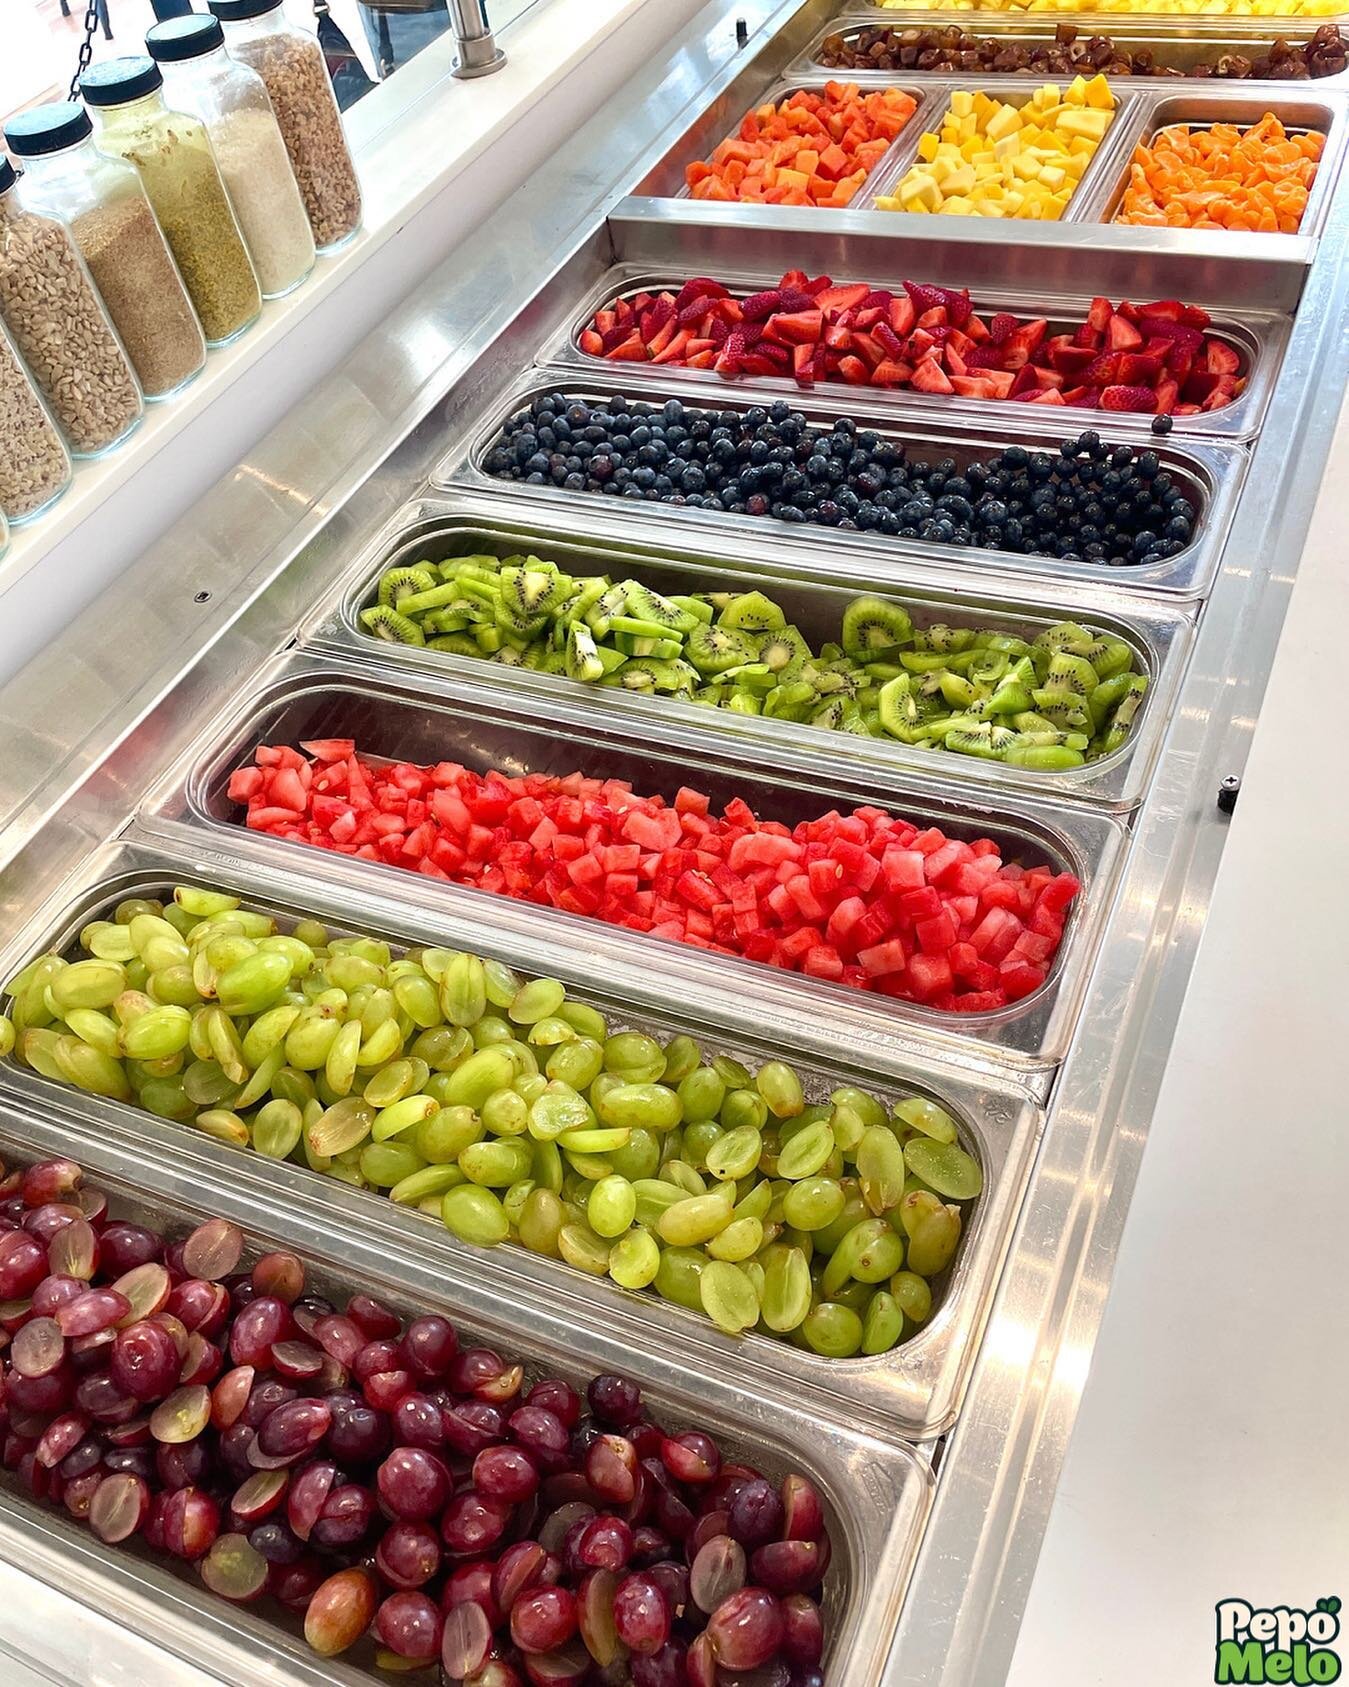 Fresh fruit is the best way to feel your best! 💪🏼 And now our Claremont location is open earlier so you can get half off during the week &mdash; see our last post for details 🤗
🍓
Tag us in your posts and stories for a chance to be featured!📱
🥝
